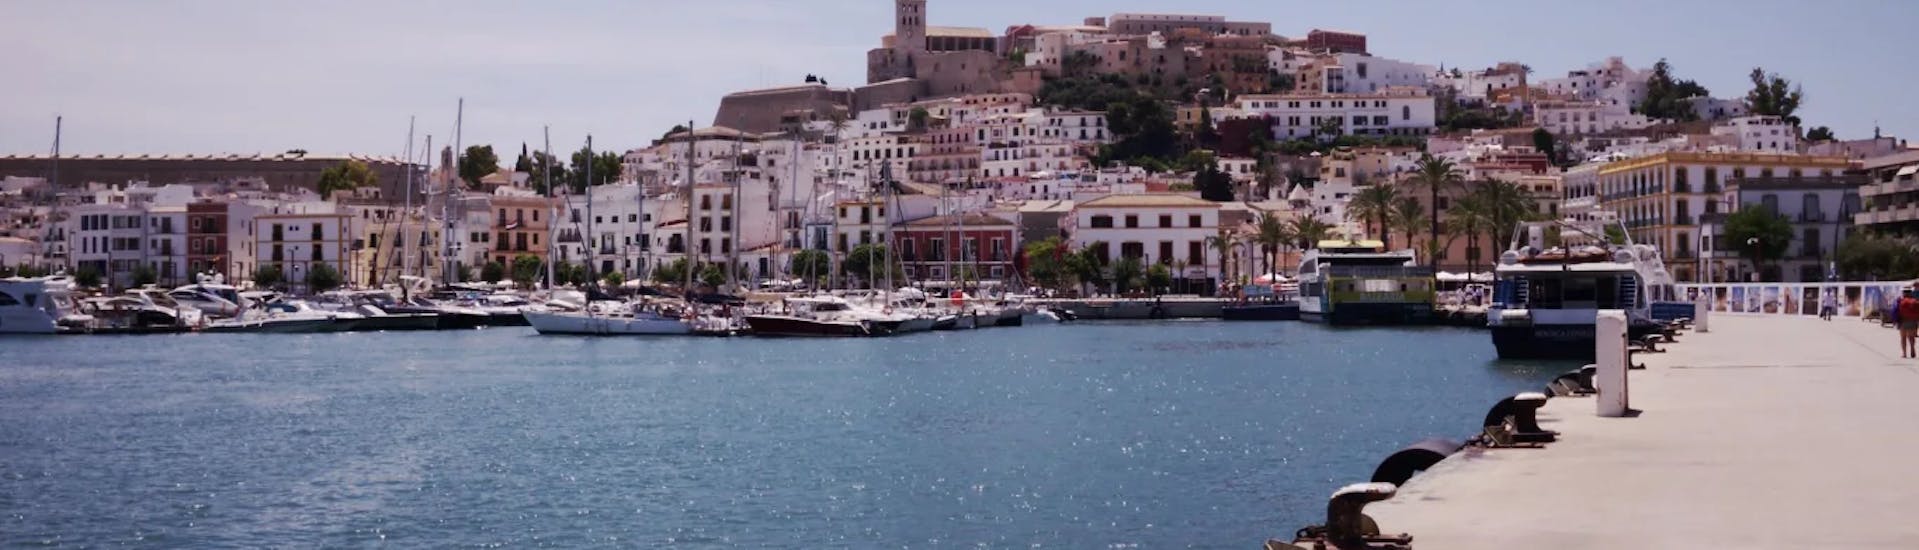 Port of Ibiza Town, from where you start your Ferry from Ibiza Town to Formentera with Aquabus Ferry Boats Ibiza.